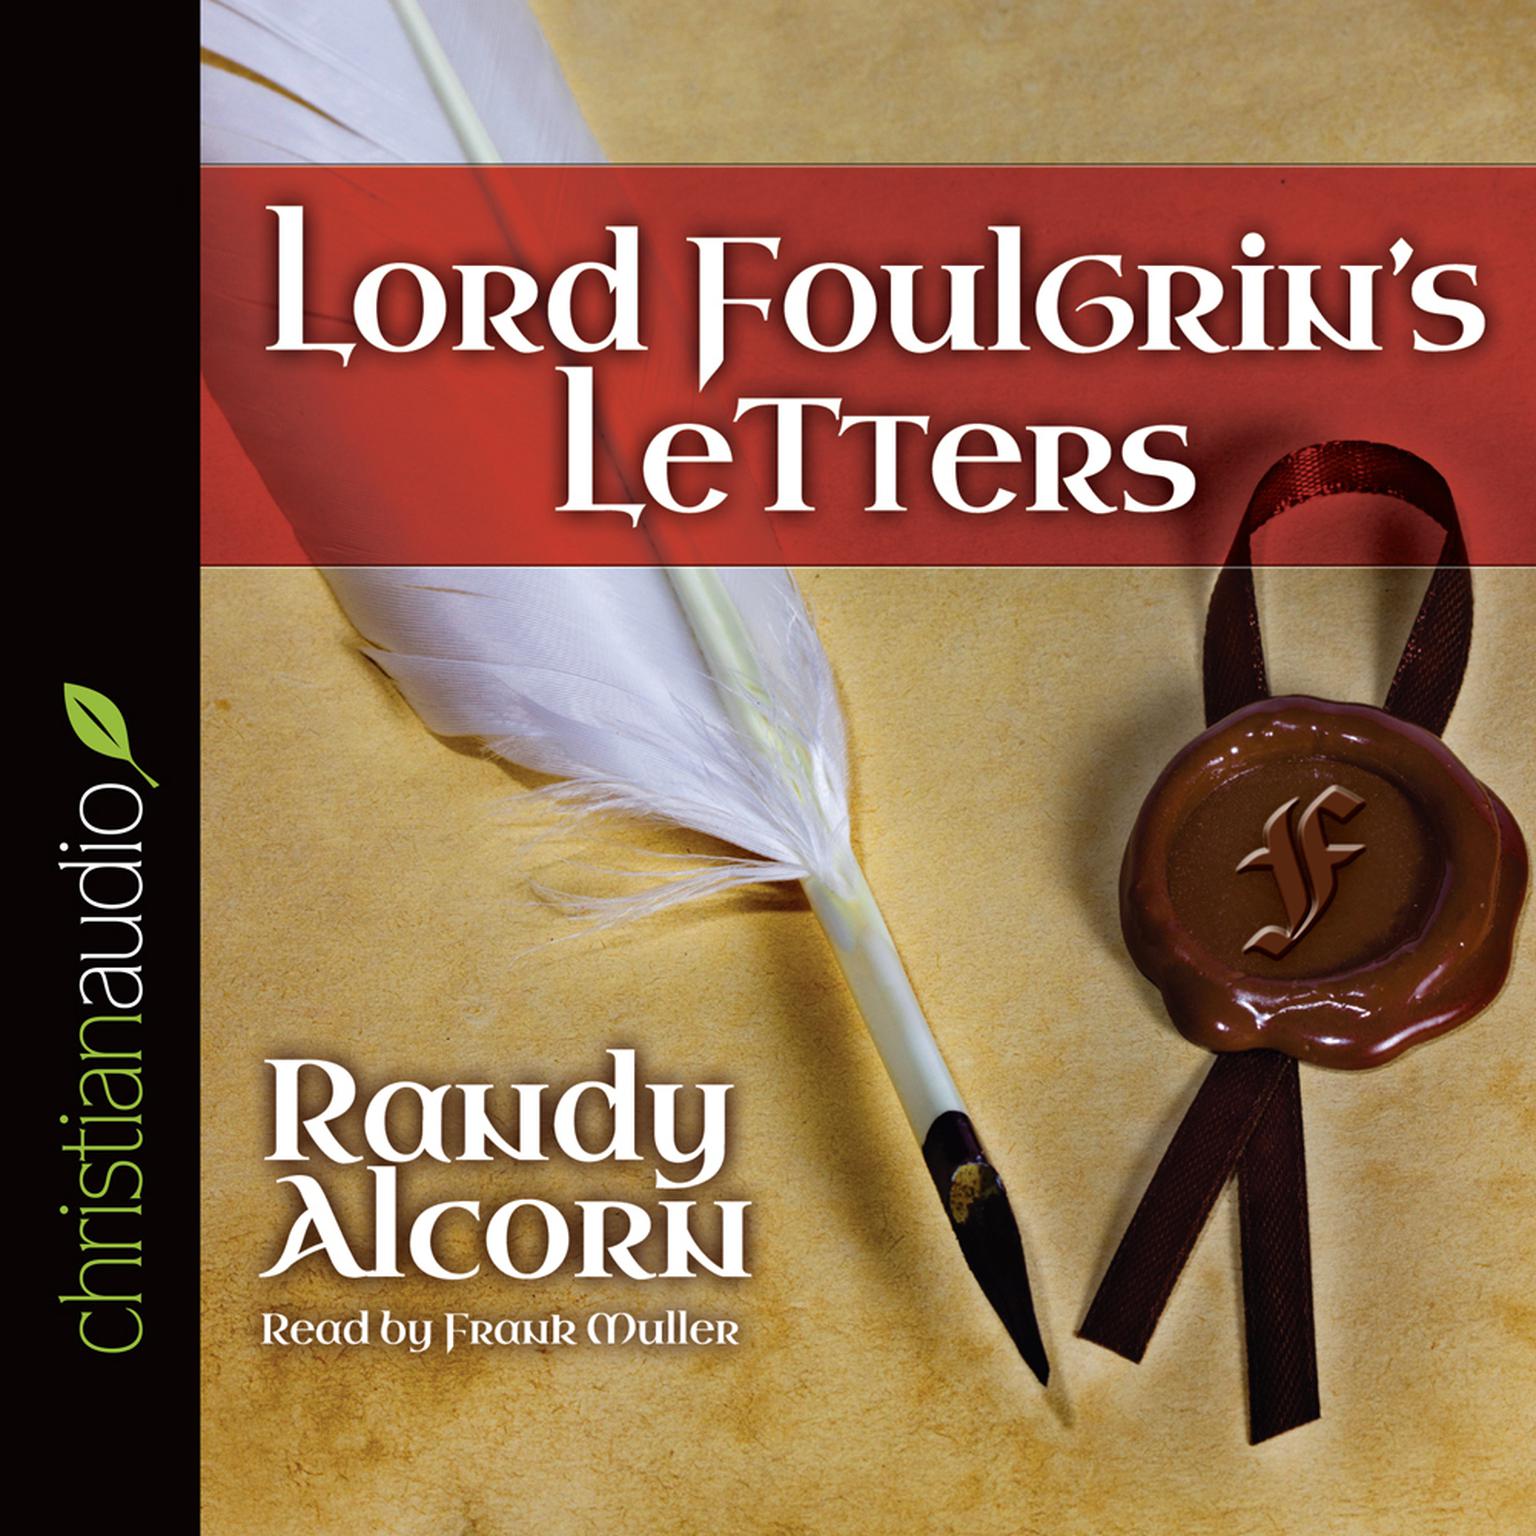 Lord Foulgrins Letters (Abridged) Audiobook, by Randy Alcorn